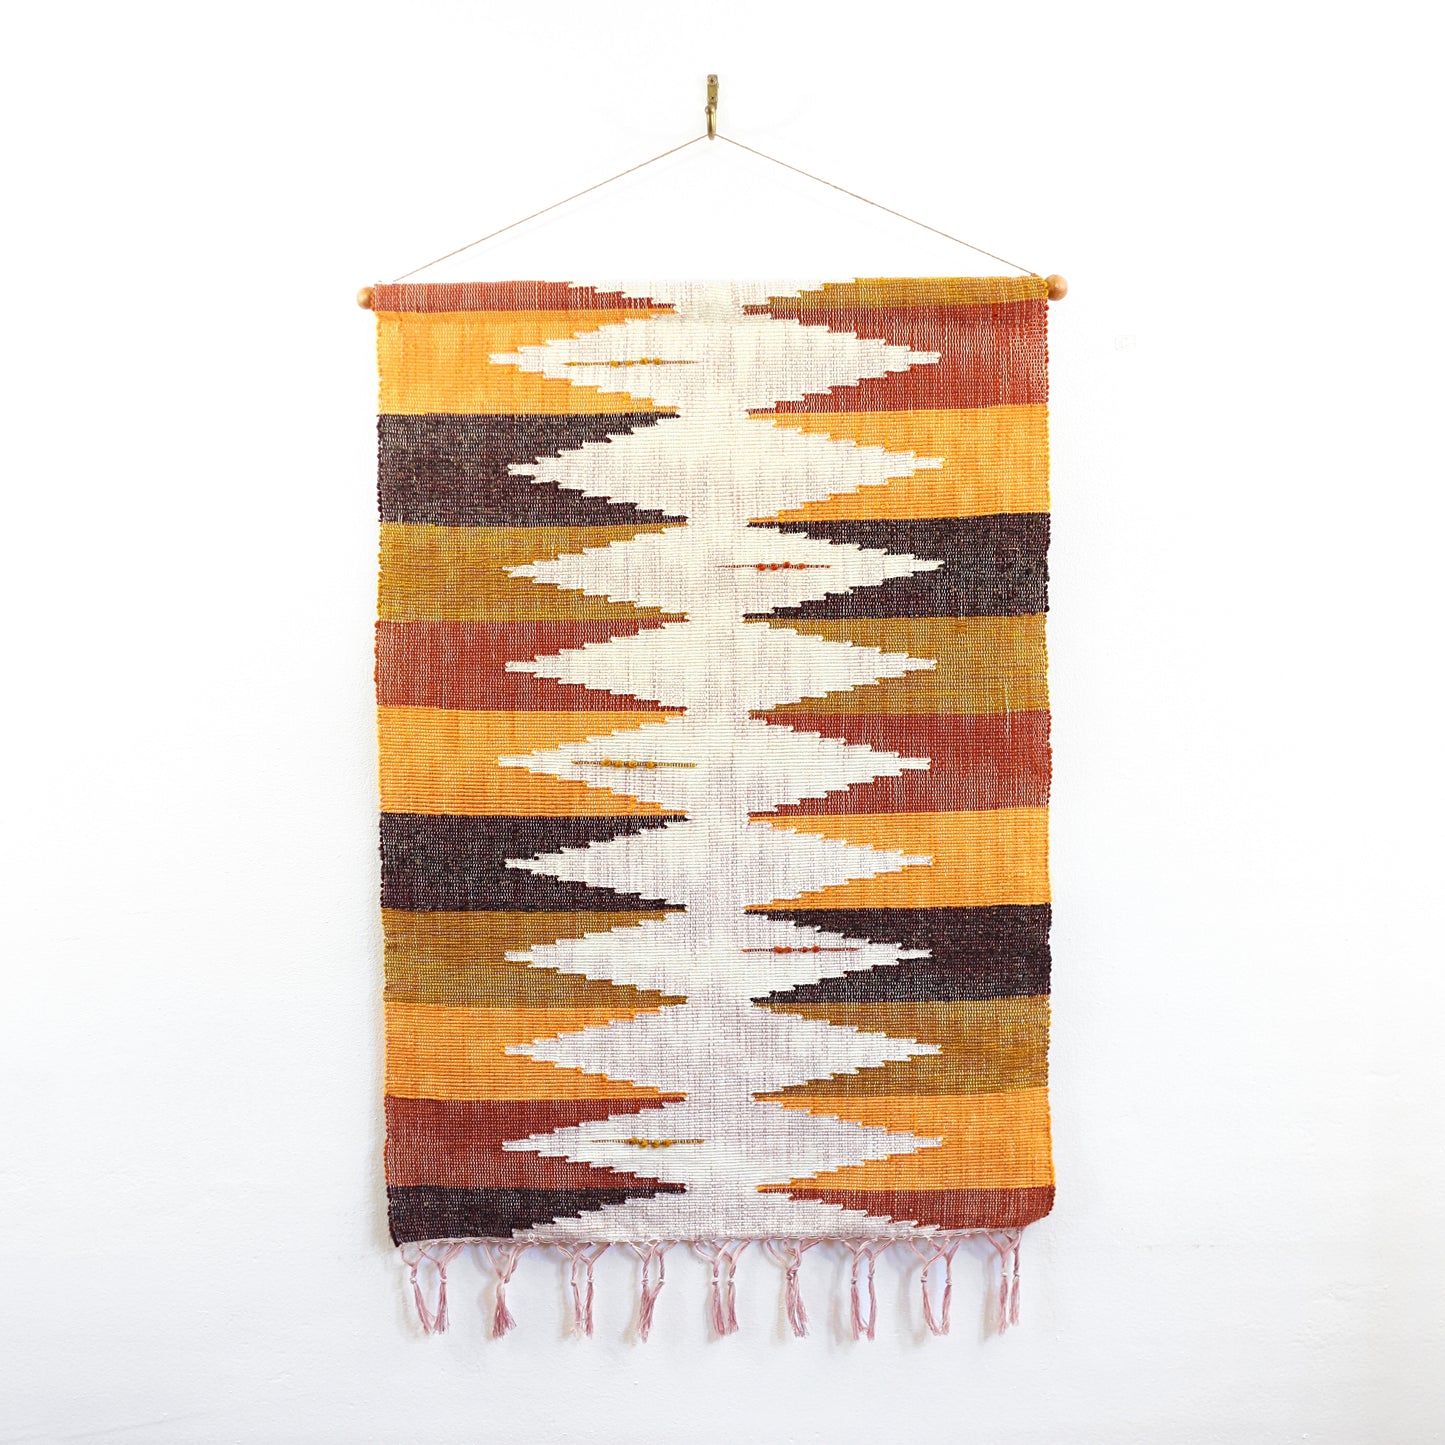 SOLD - Large Vintage Handwoven Wall Hanging